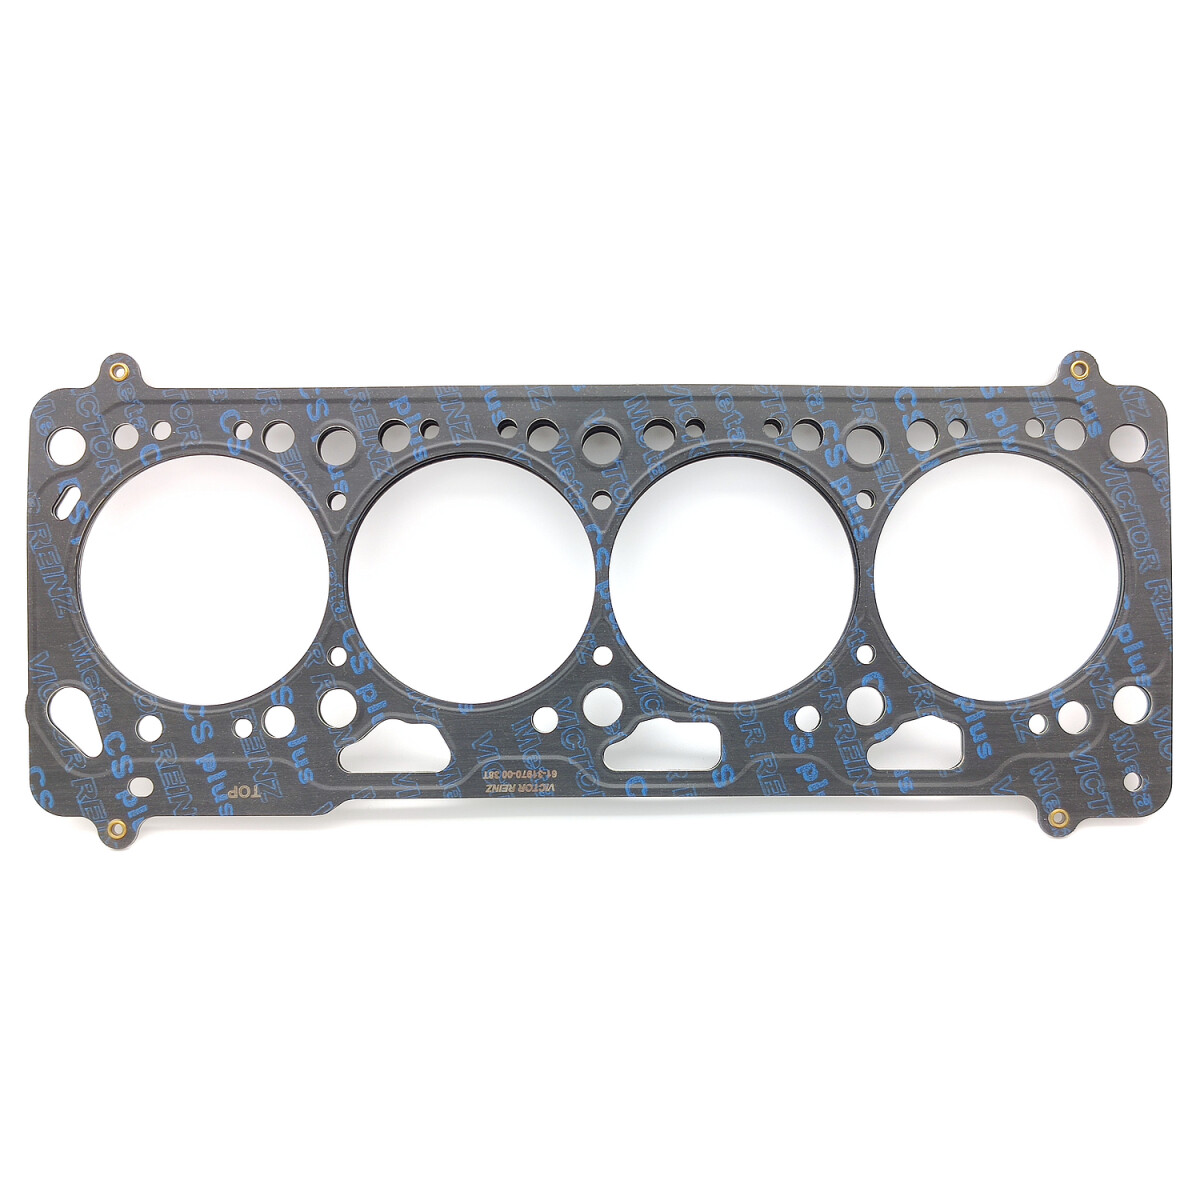 Compression reduction plate (4,0 mm) with integrated cylinder head gasket for VW Polo 86 / 86C (all 0.9 - 1.3L engines, also G40)